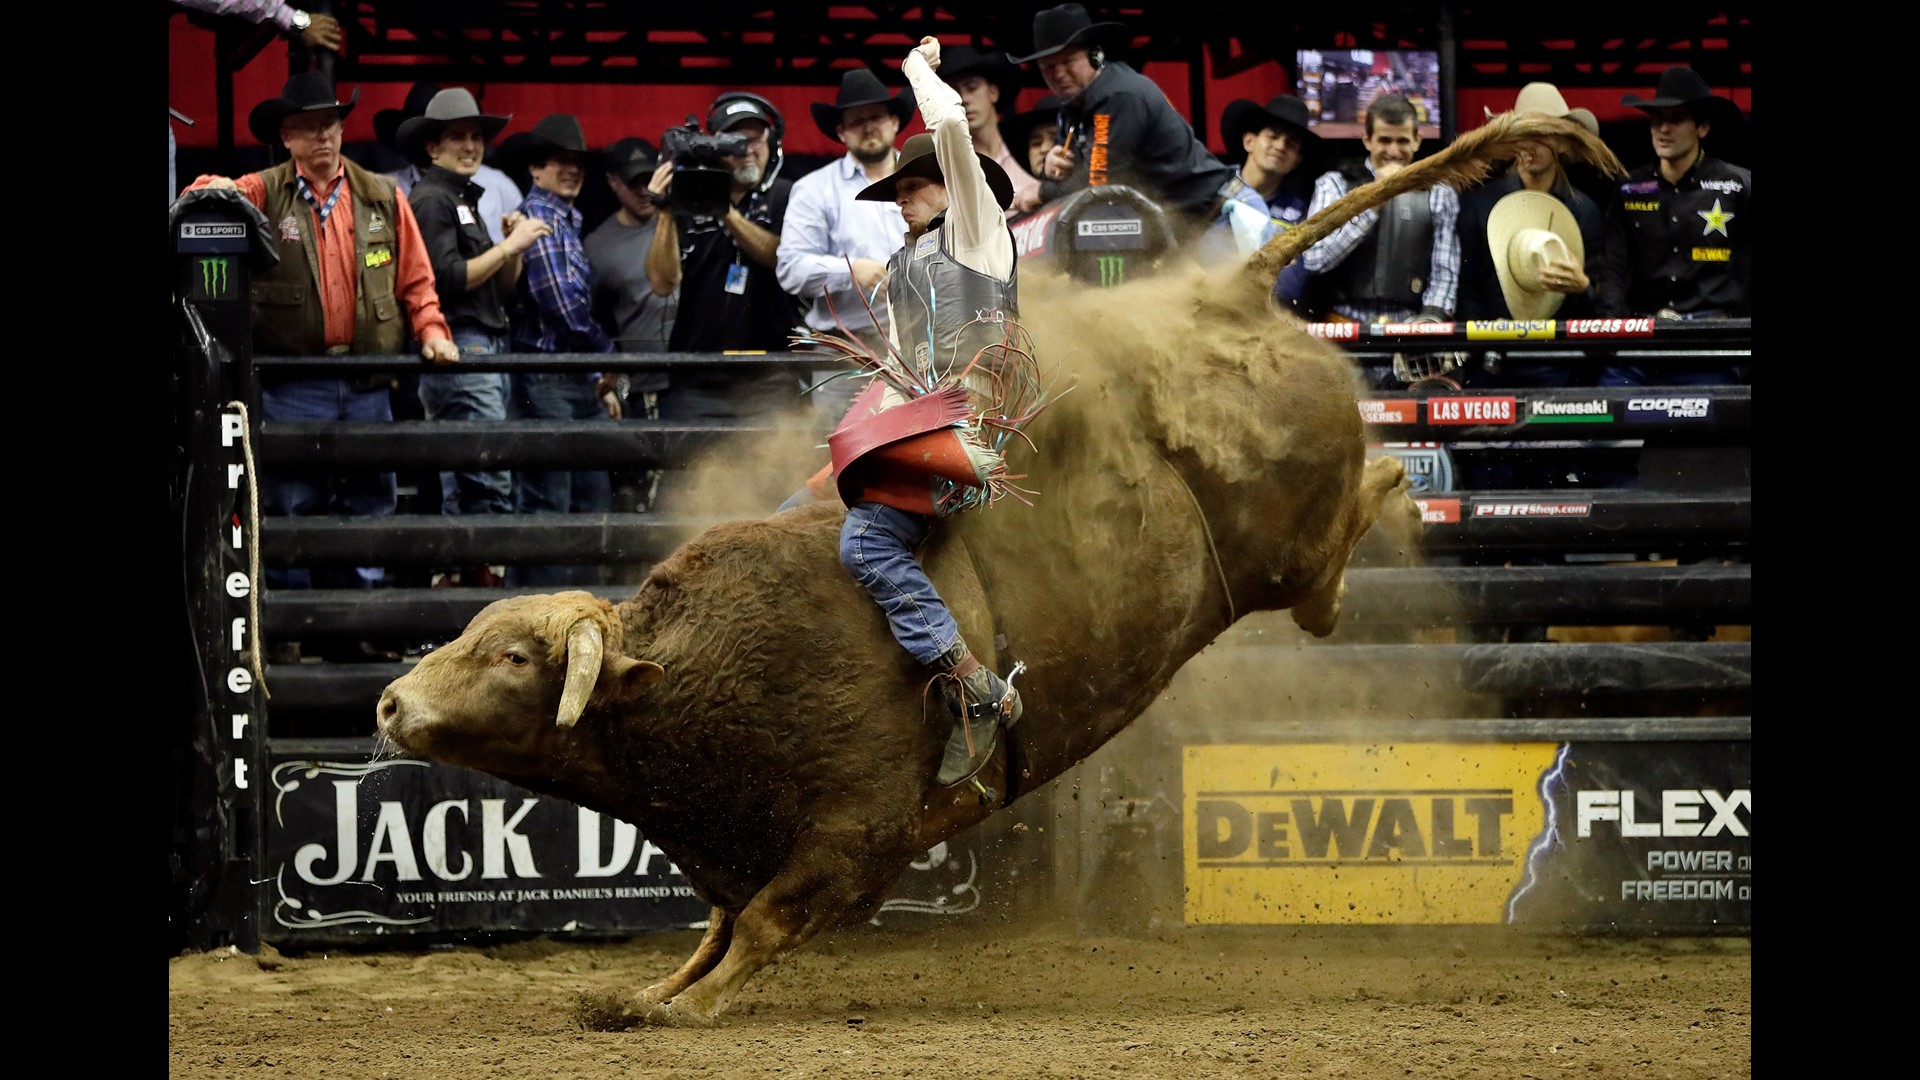 Bull rider dies after being injured during event at National Western